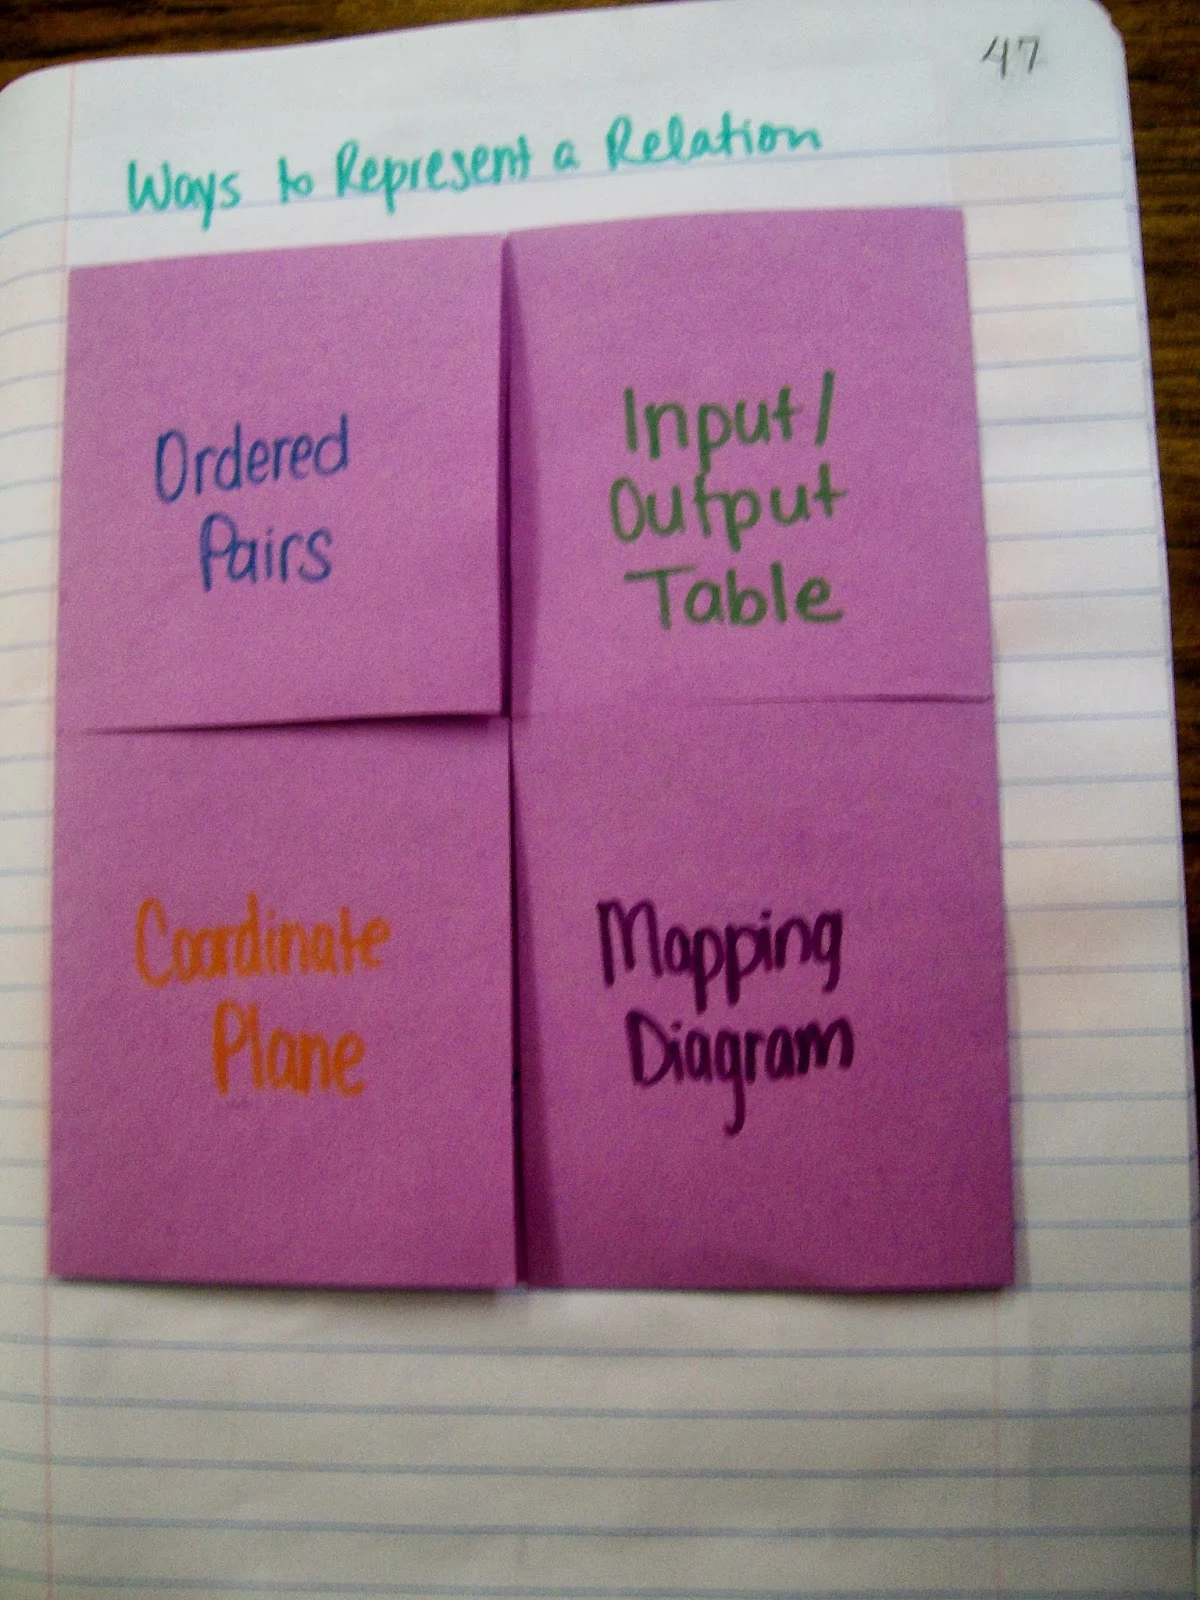 ways to represent a relation foldable